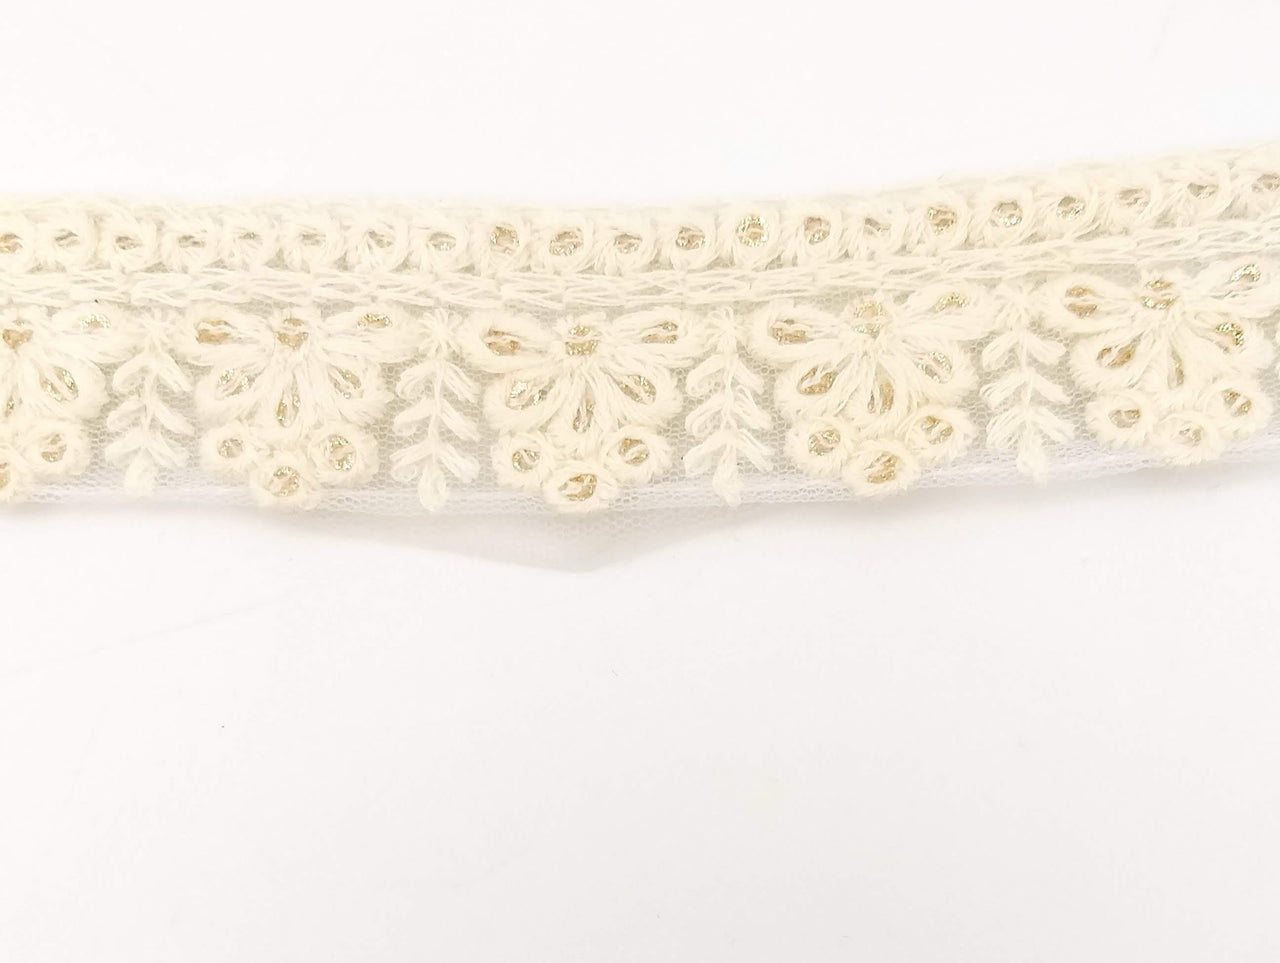 Off White Net Lace Trim With Floral Embroidery And Gold Sequins, Sequinned Trim, Wedding Trim Bridal Trim